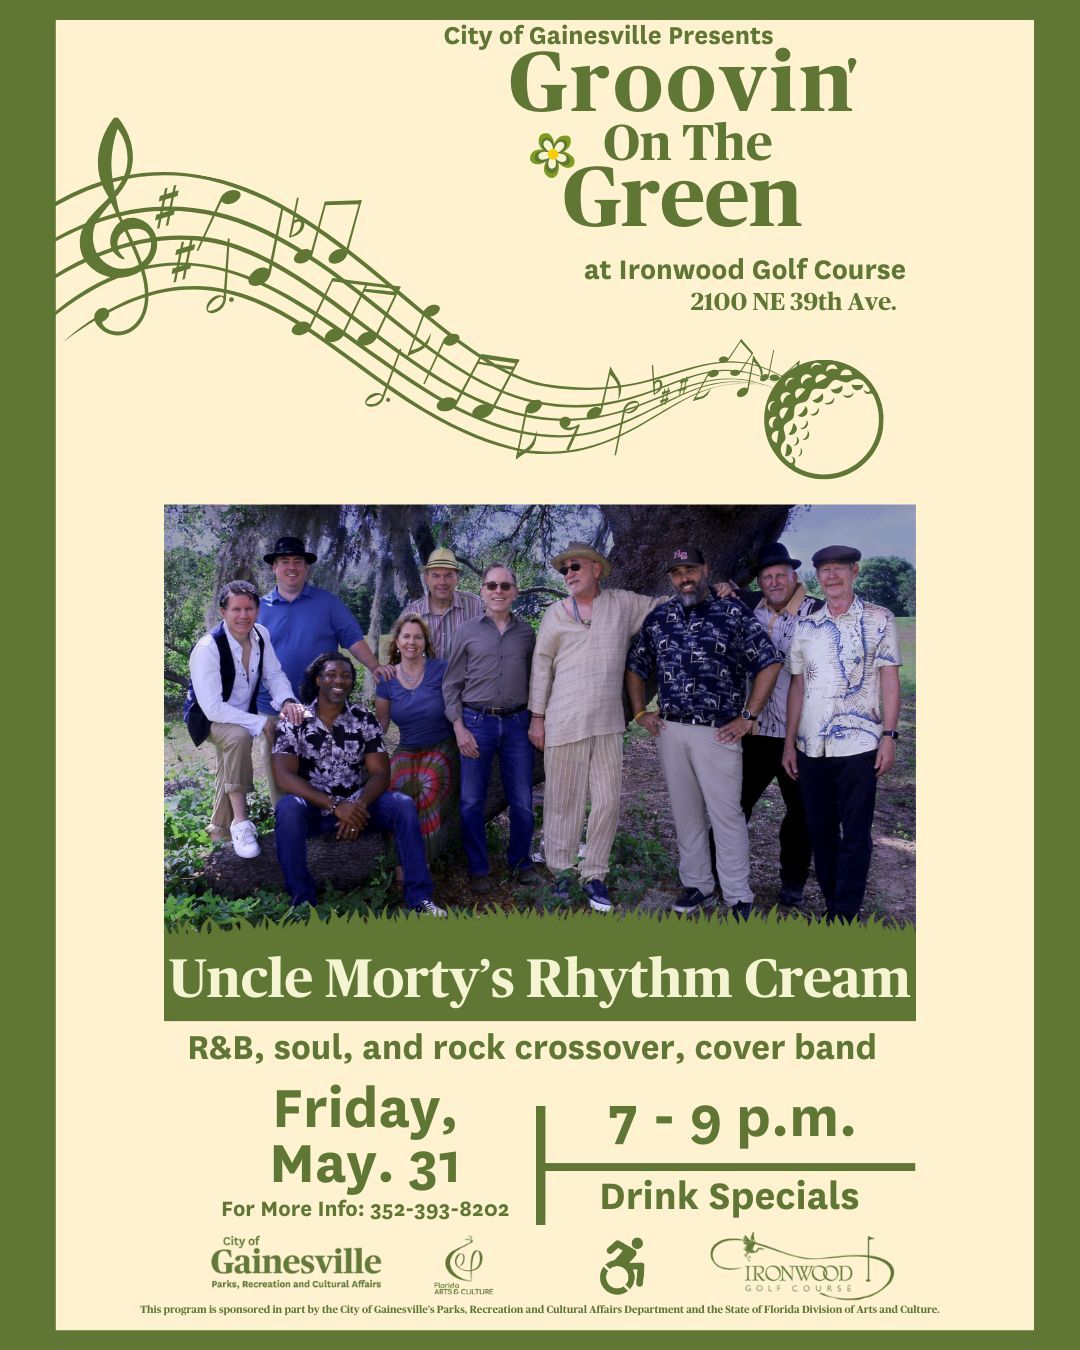 Uncle Morty's Rhythm Cream at Groovin' on the Green Concert Series